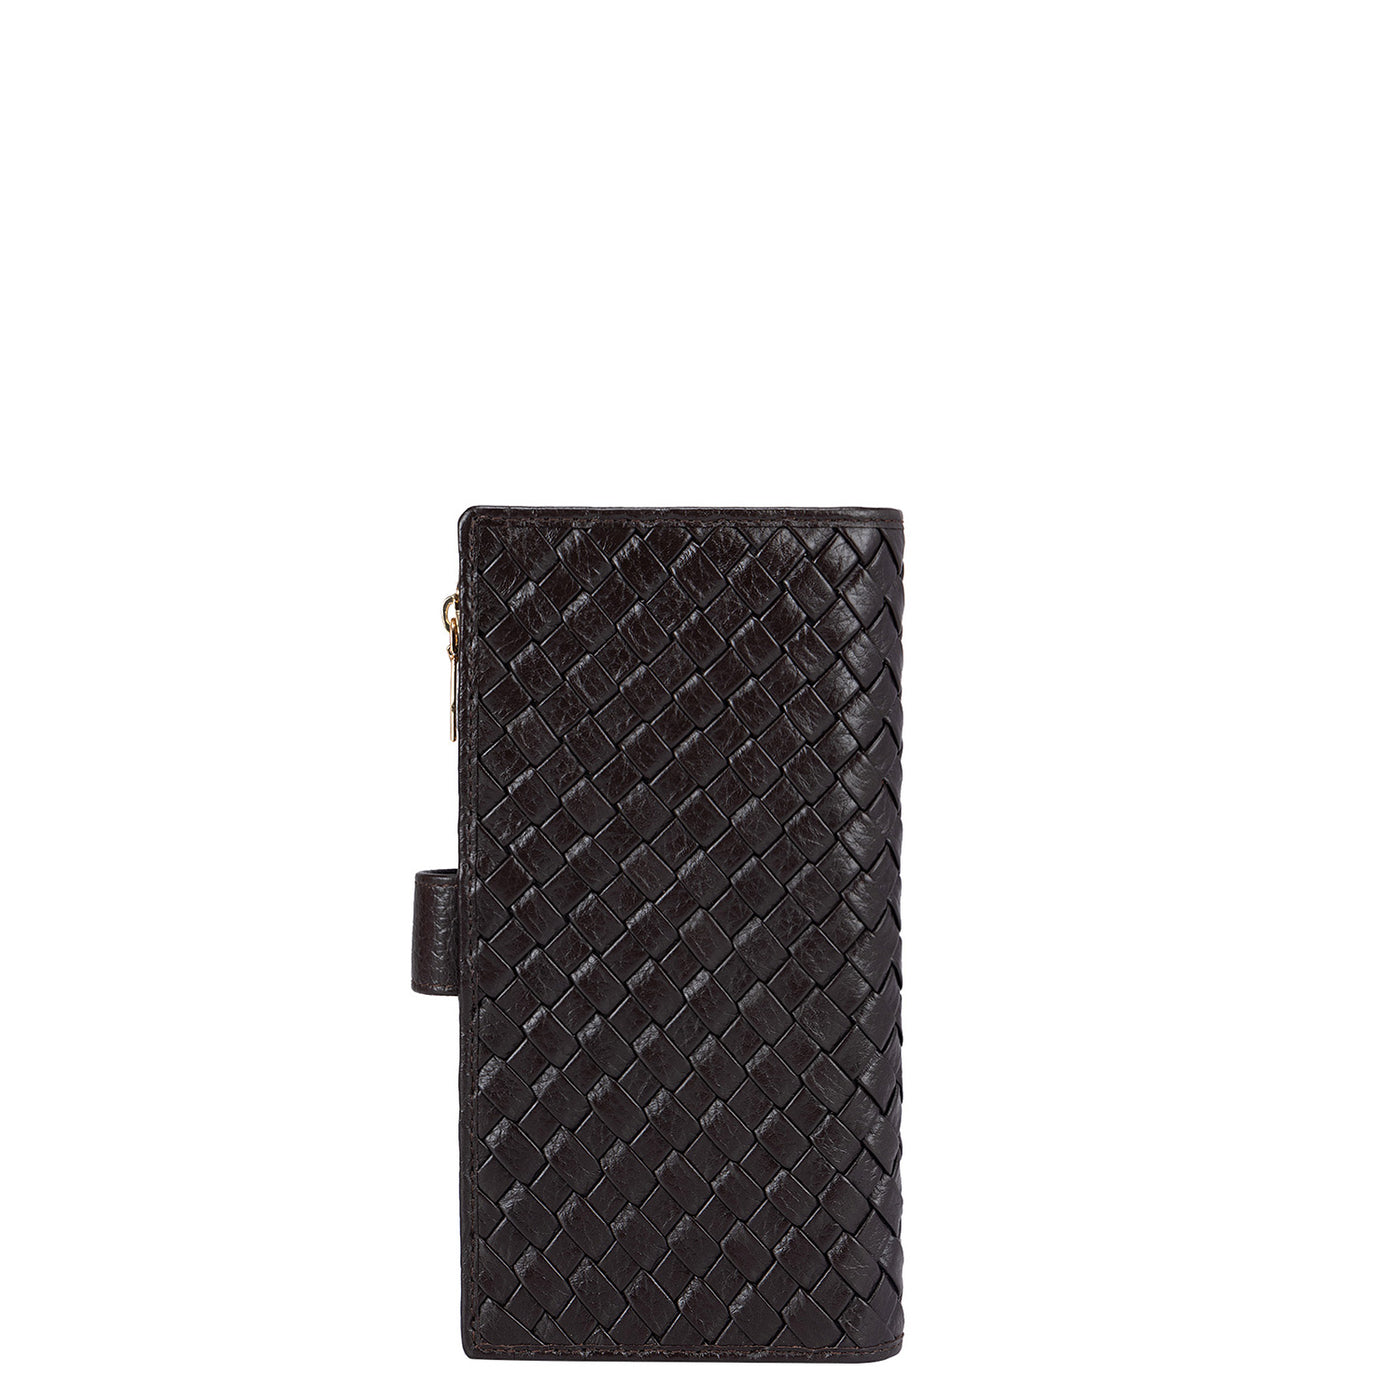 Mat Leather Ladies Wallet - Chocolate